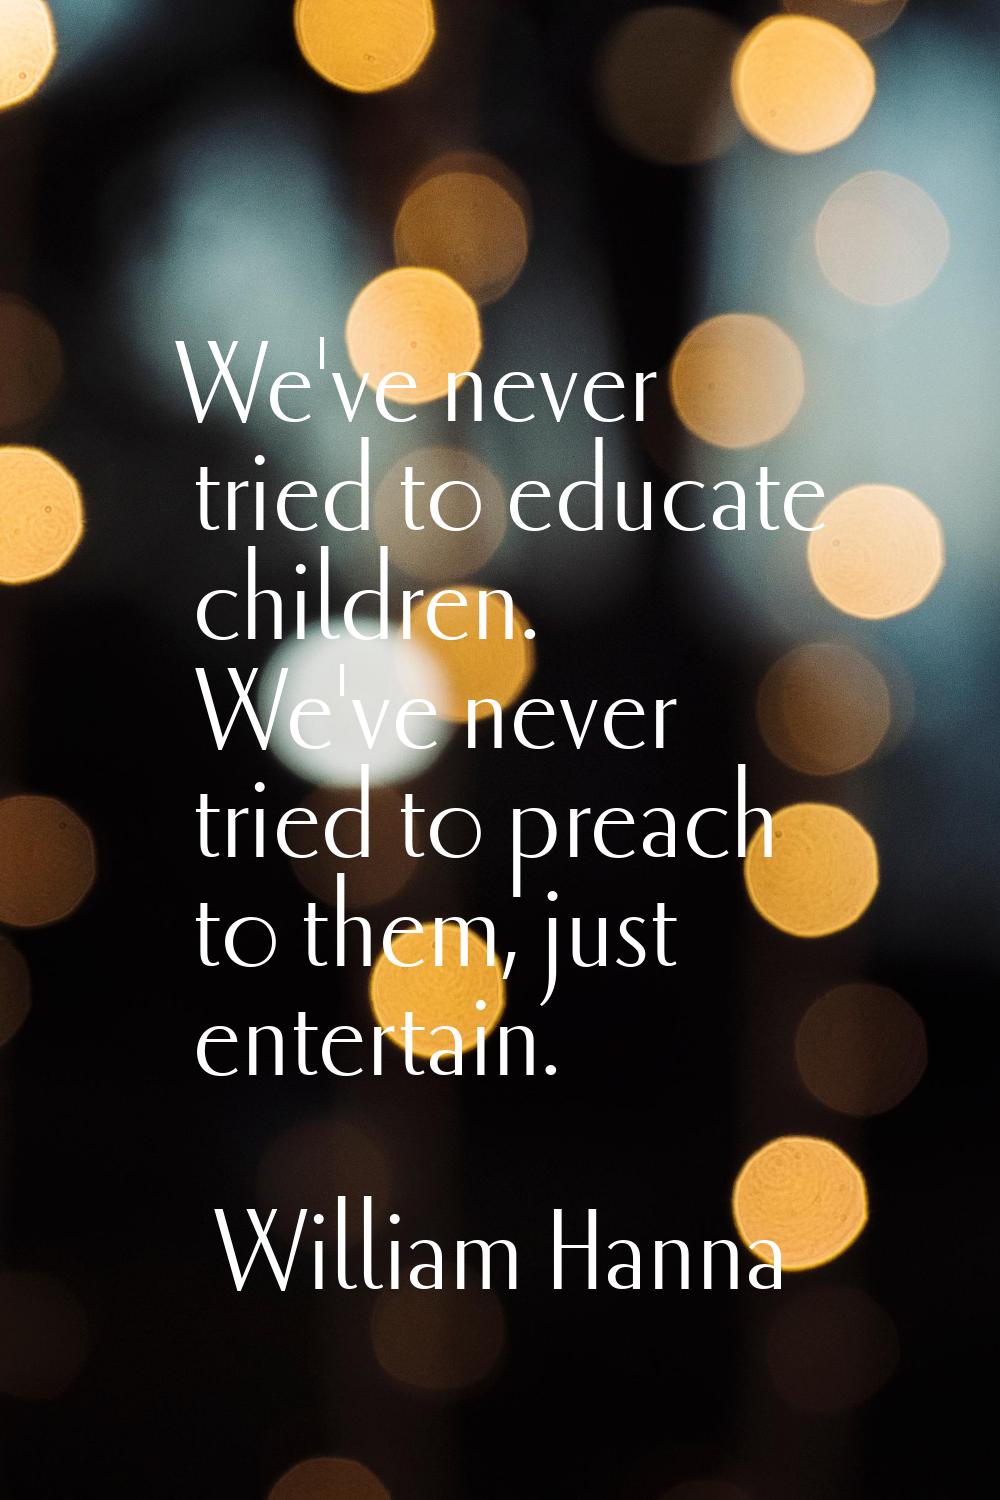 We've never tried to educate children. We've never tried to preach to them, just entertain.